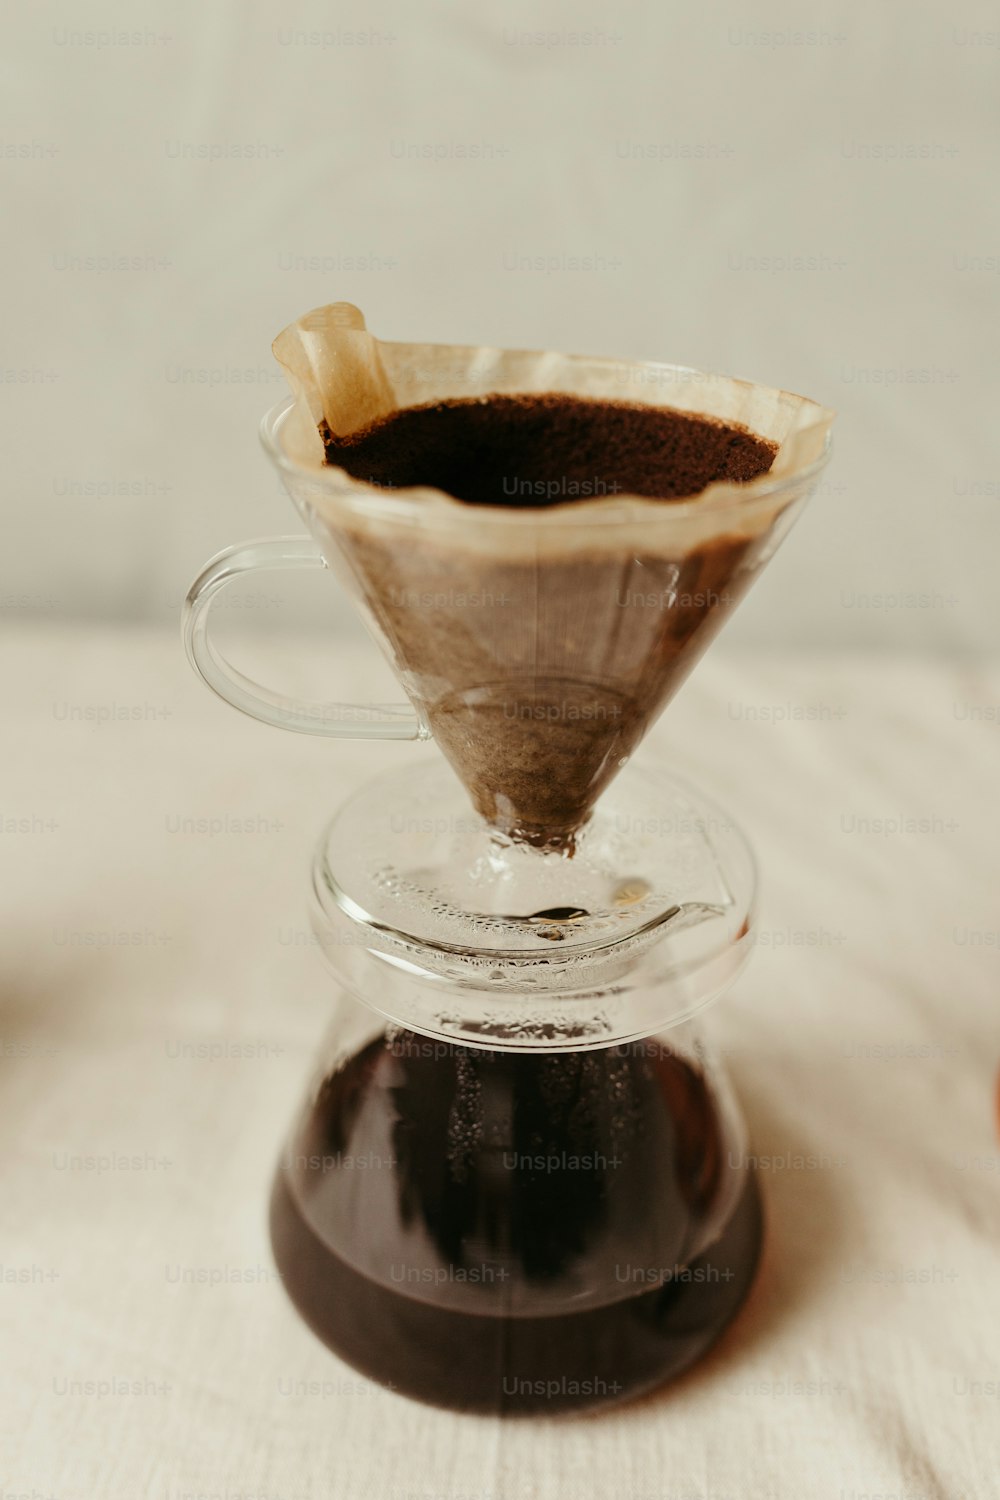 a pour - over coffee maker filled with coffee sits on a table